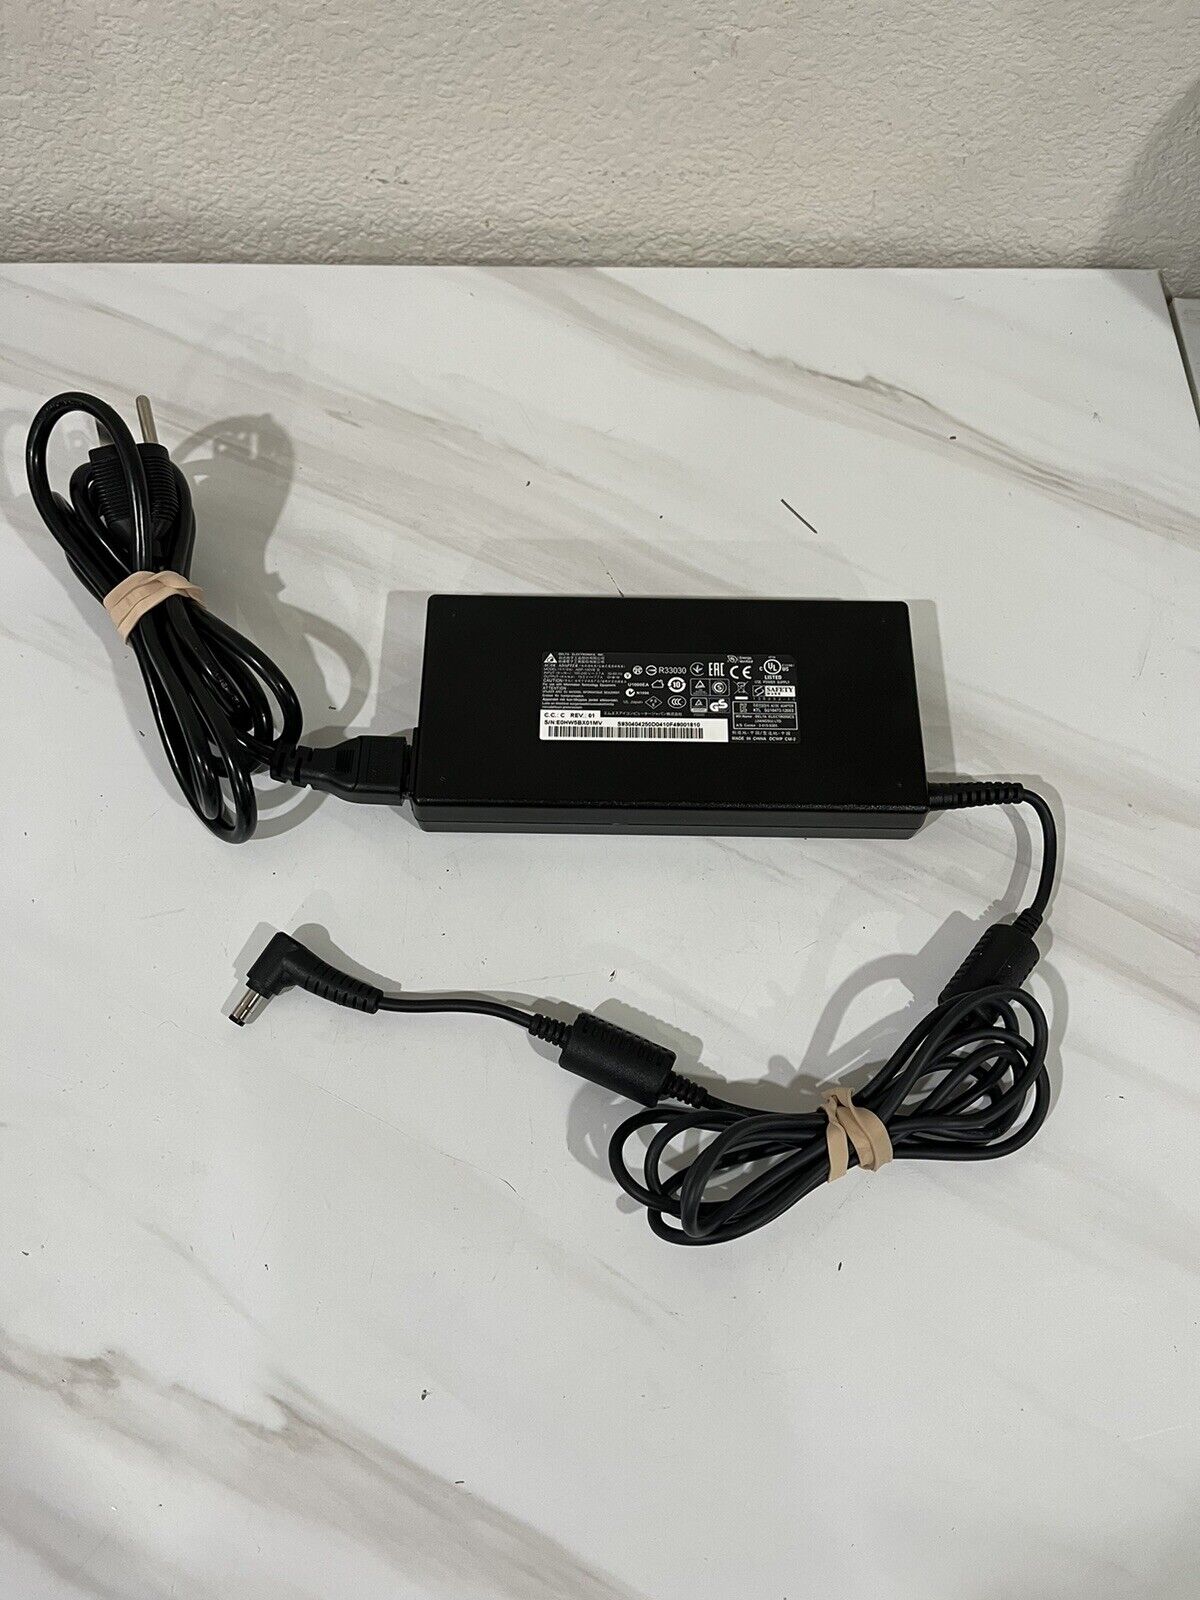 Original Delta MSI Laptop Charger AC Adapter ADP-150VB B 150W + Power Cord